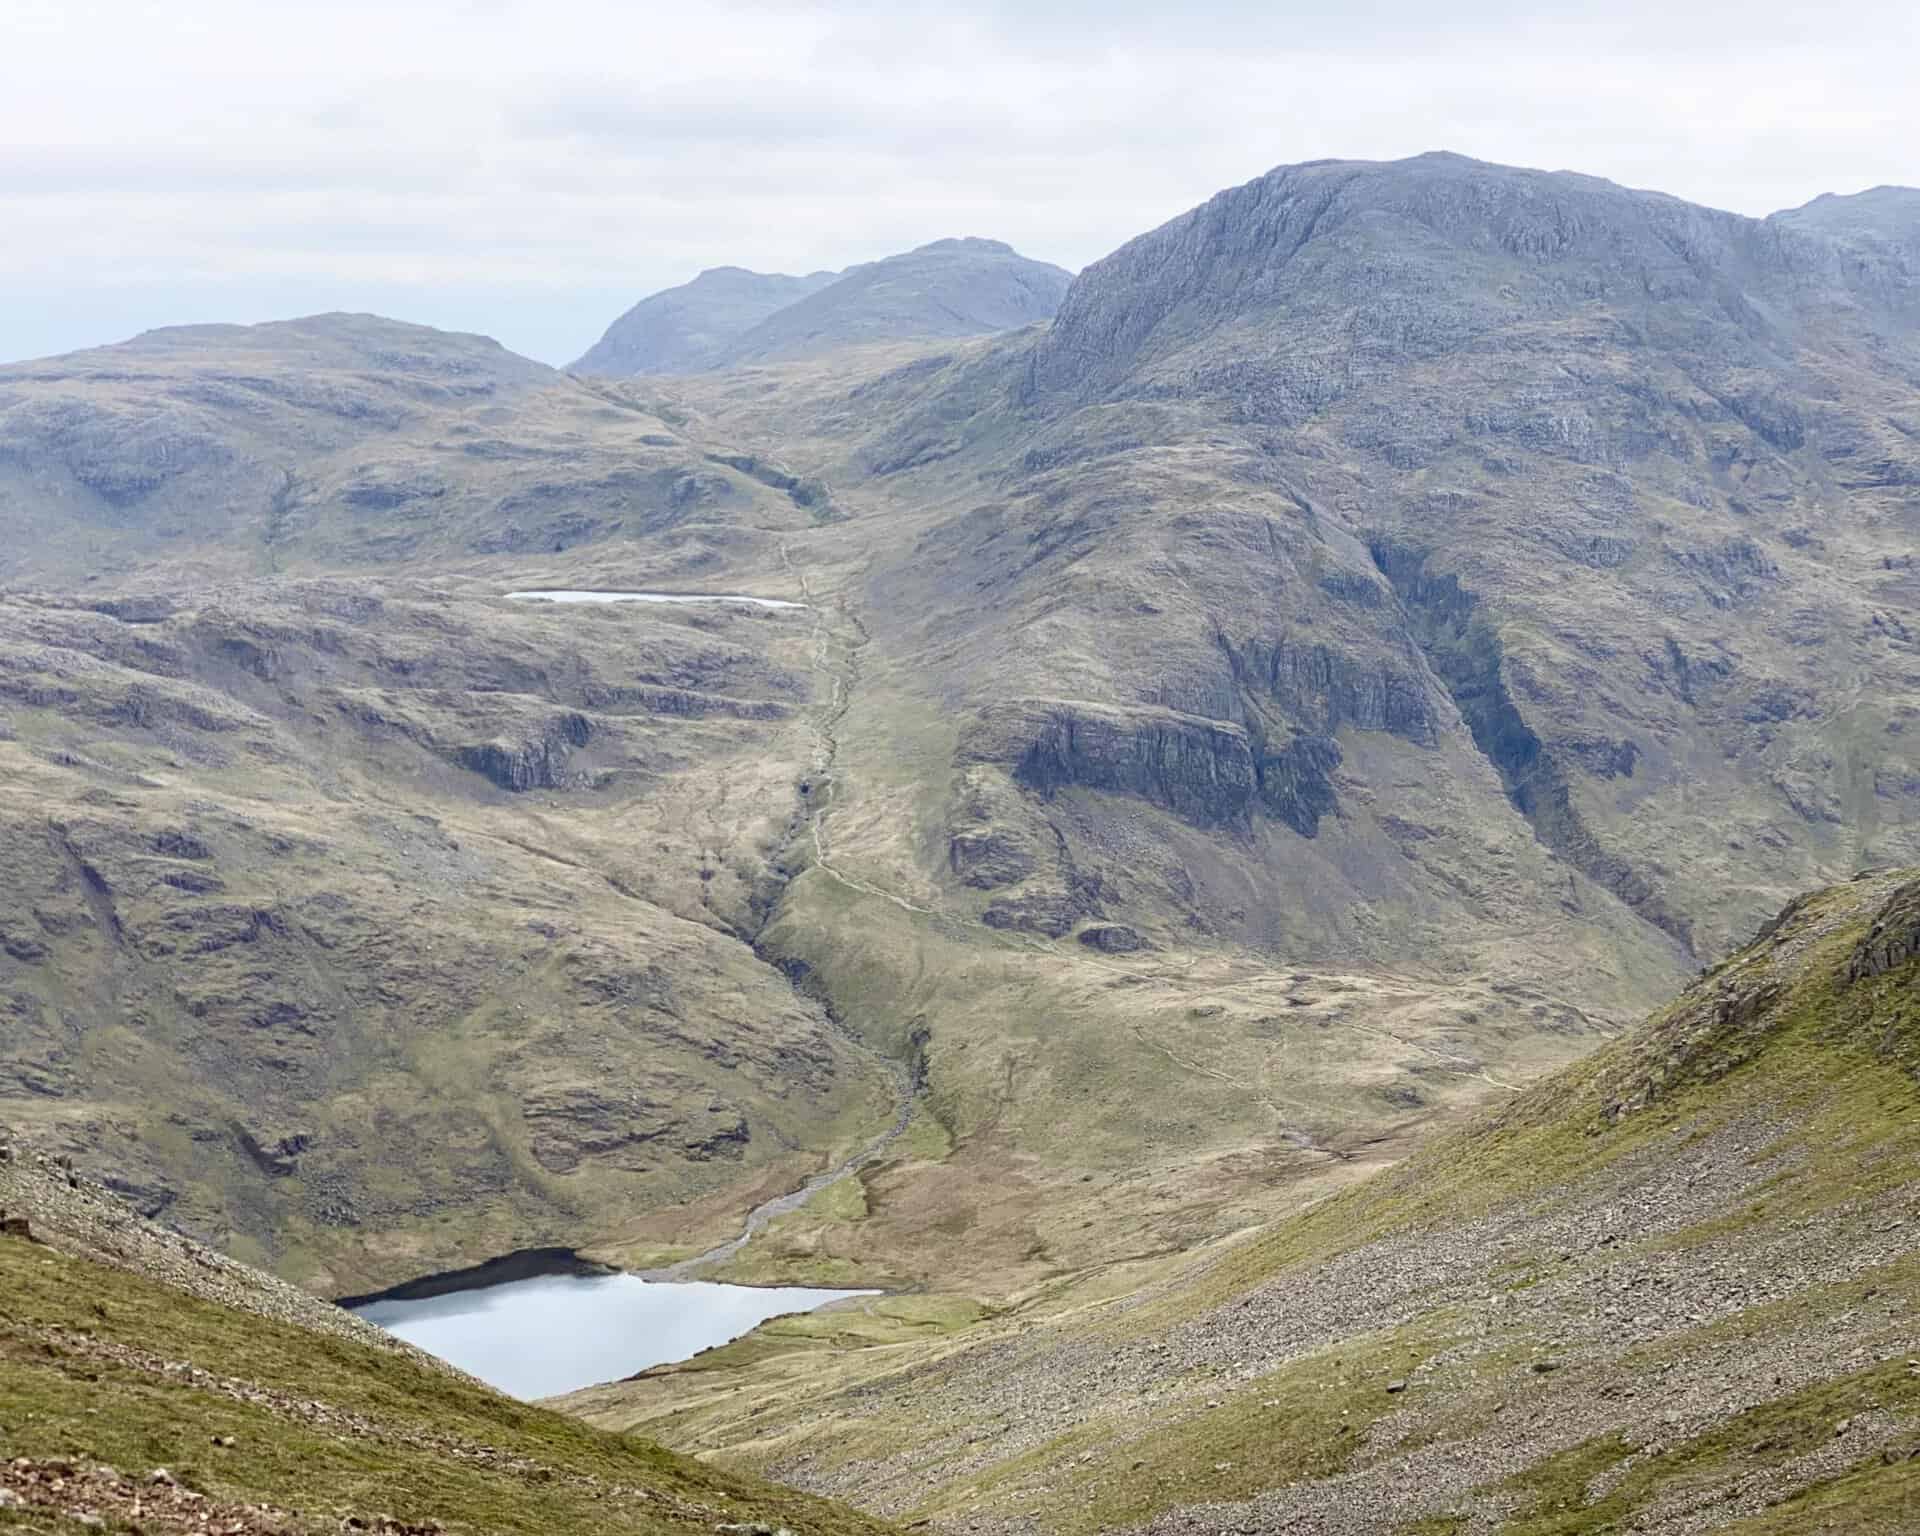 The view south-east from Windy Gap down to Styhead Tarn and over to the higher Sprinkling Tarn.